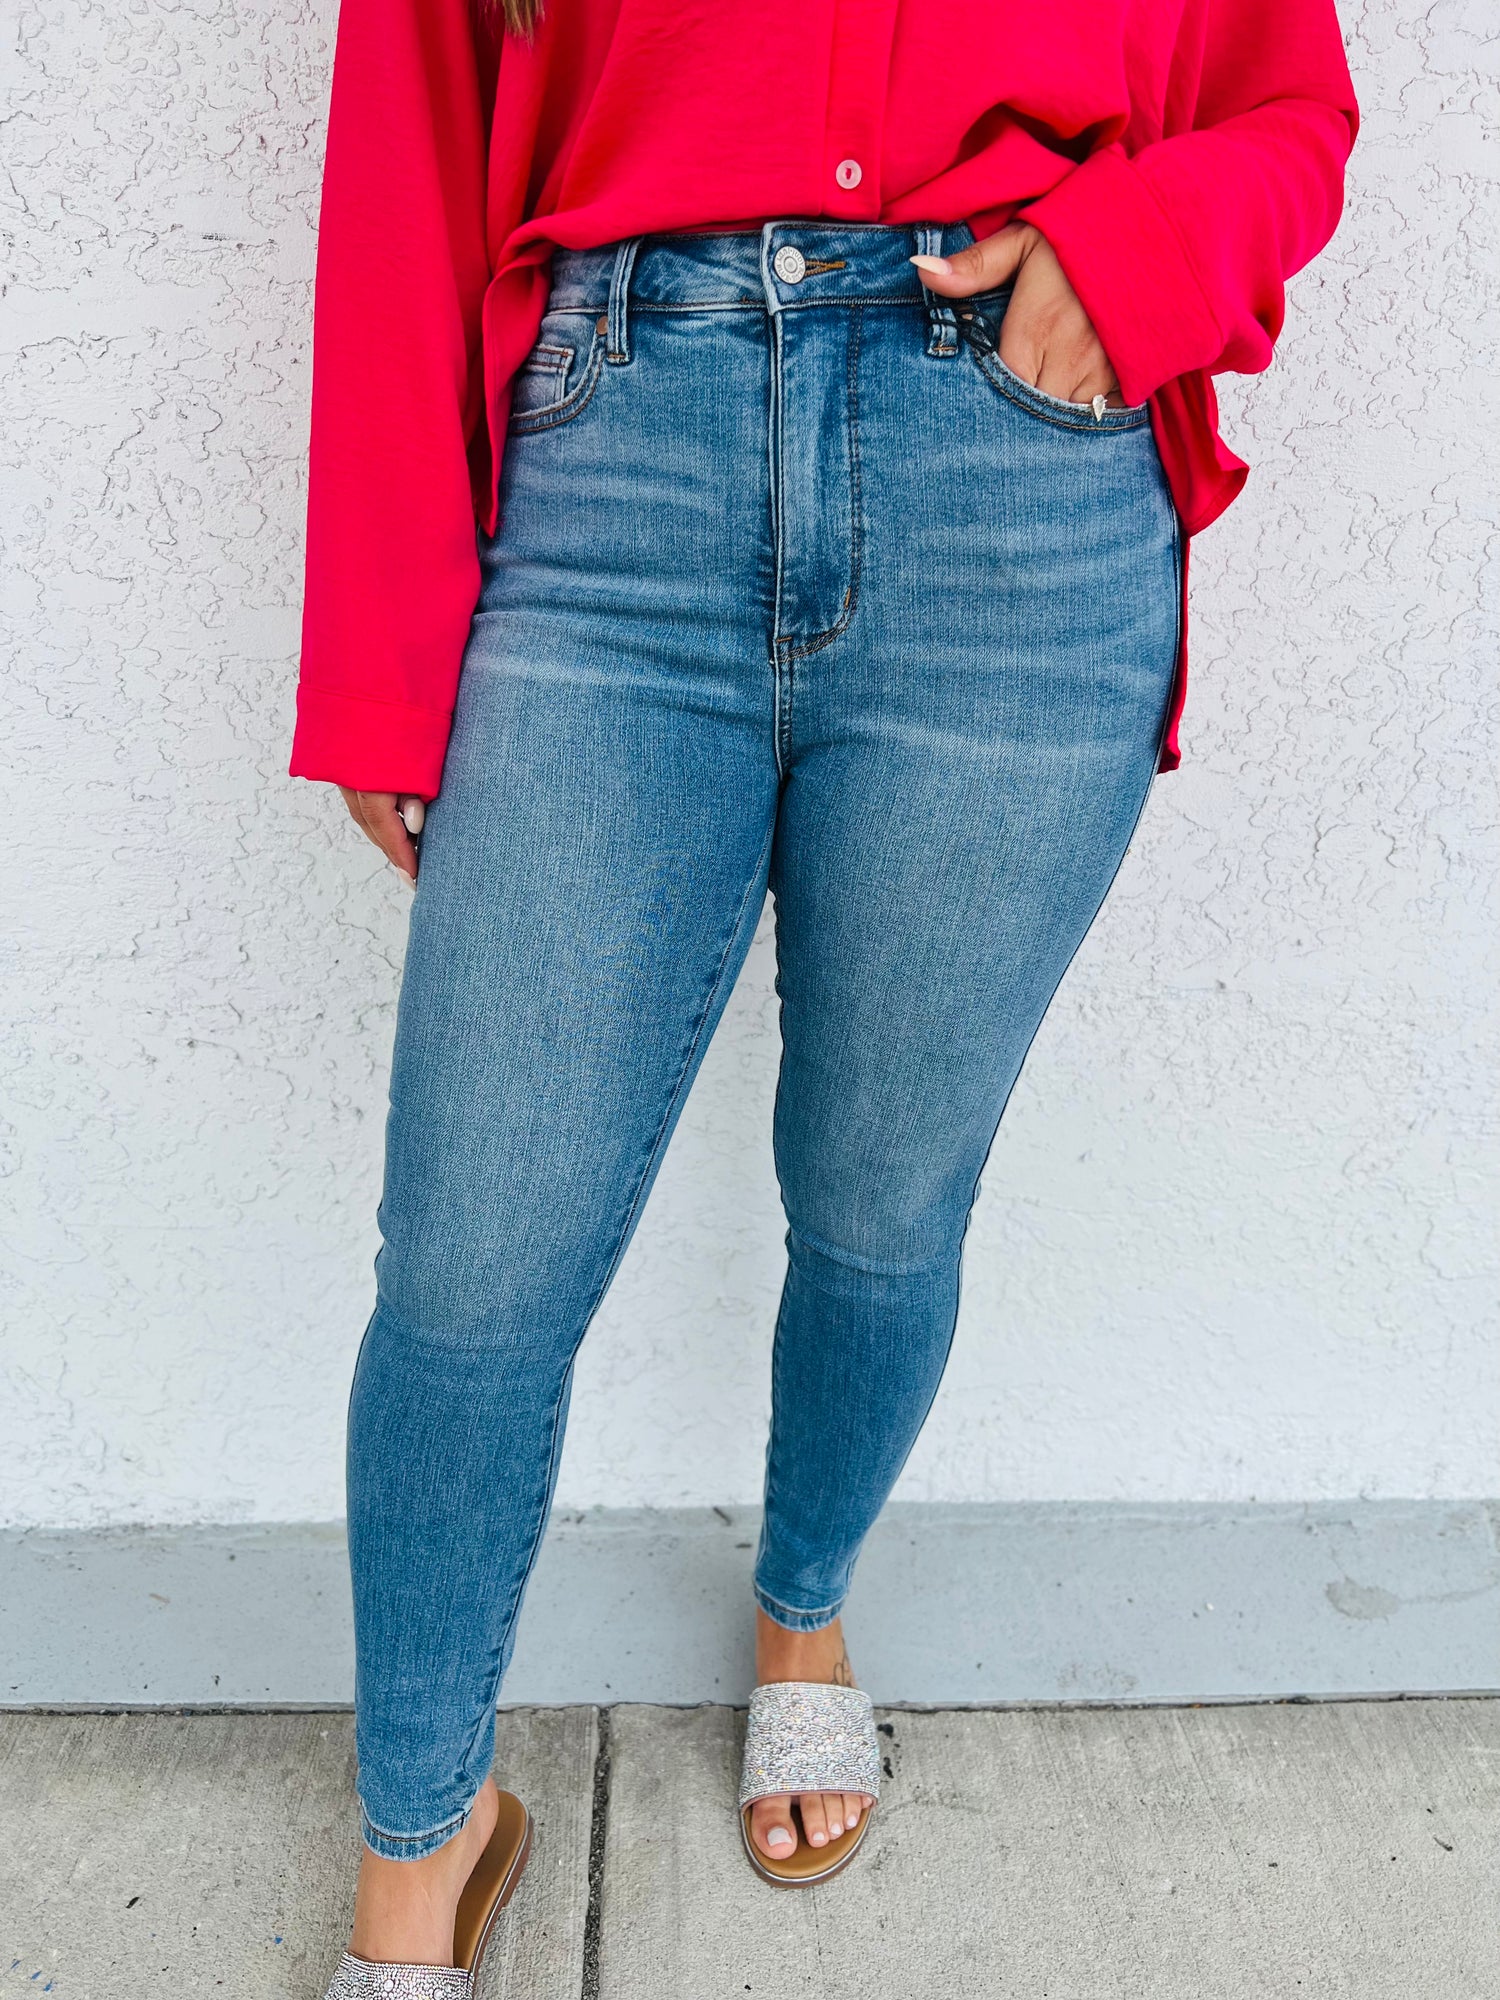 Judy Blue High Rise Red Tummy Control Top Skinny Jeans